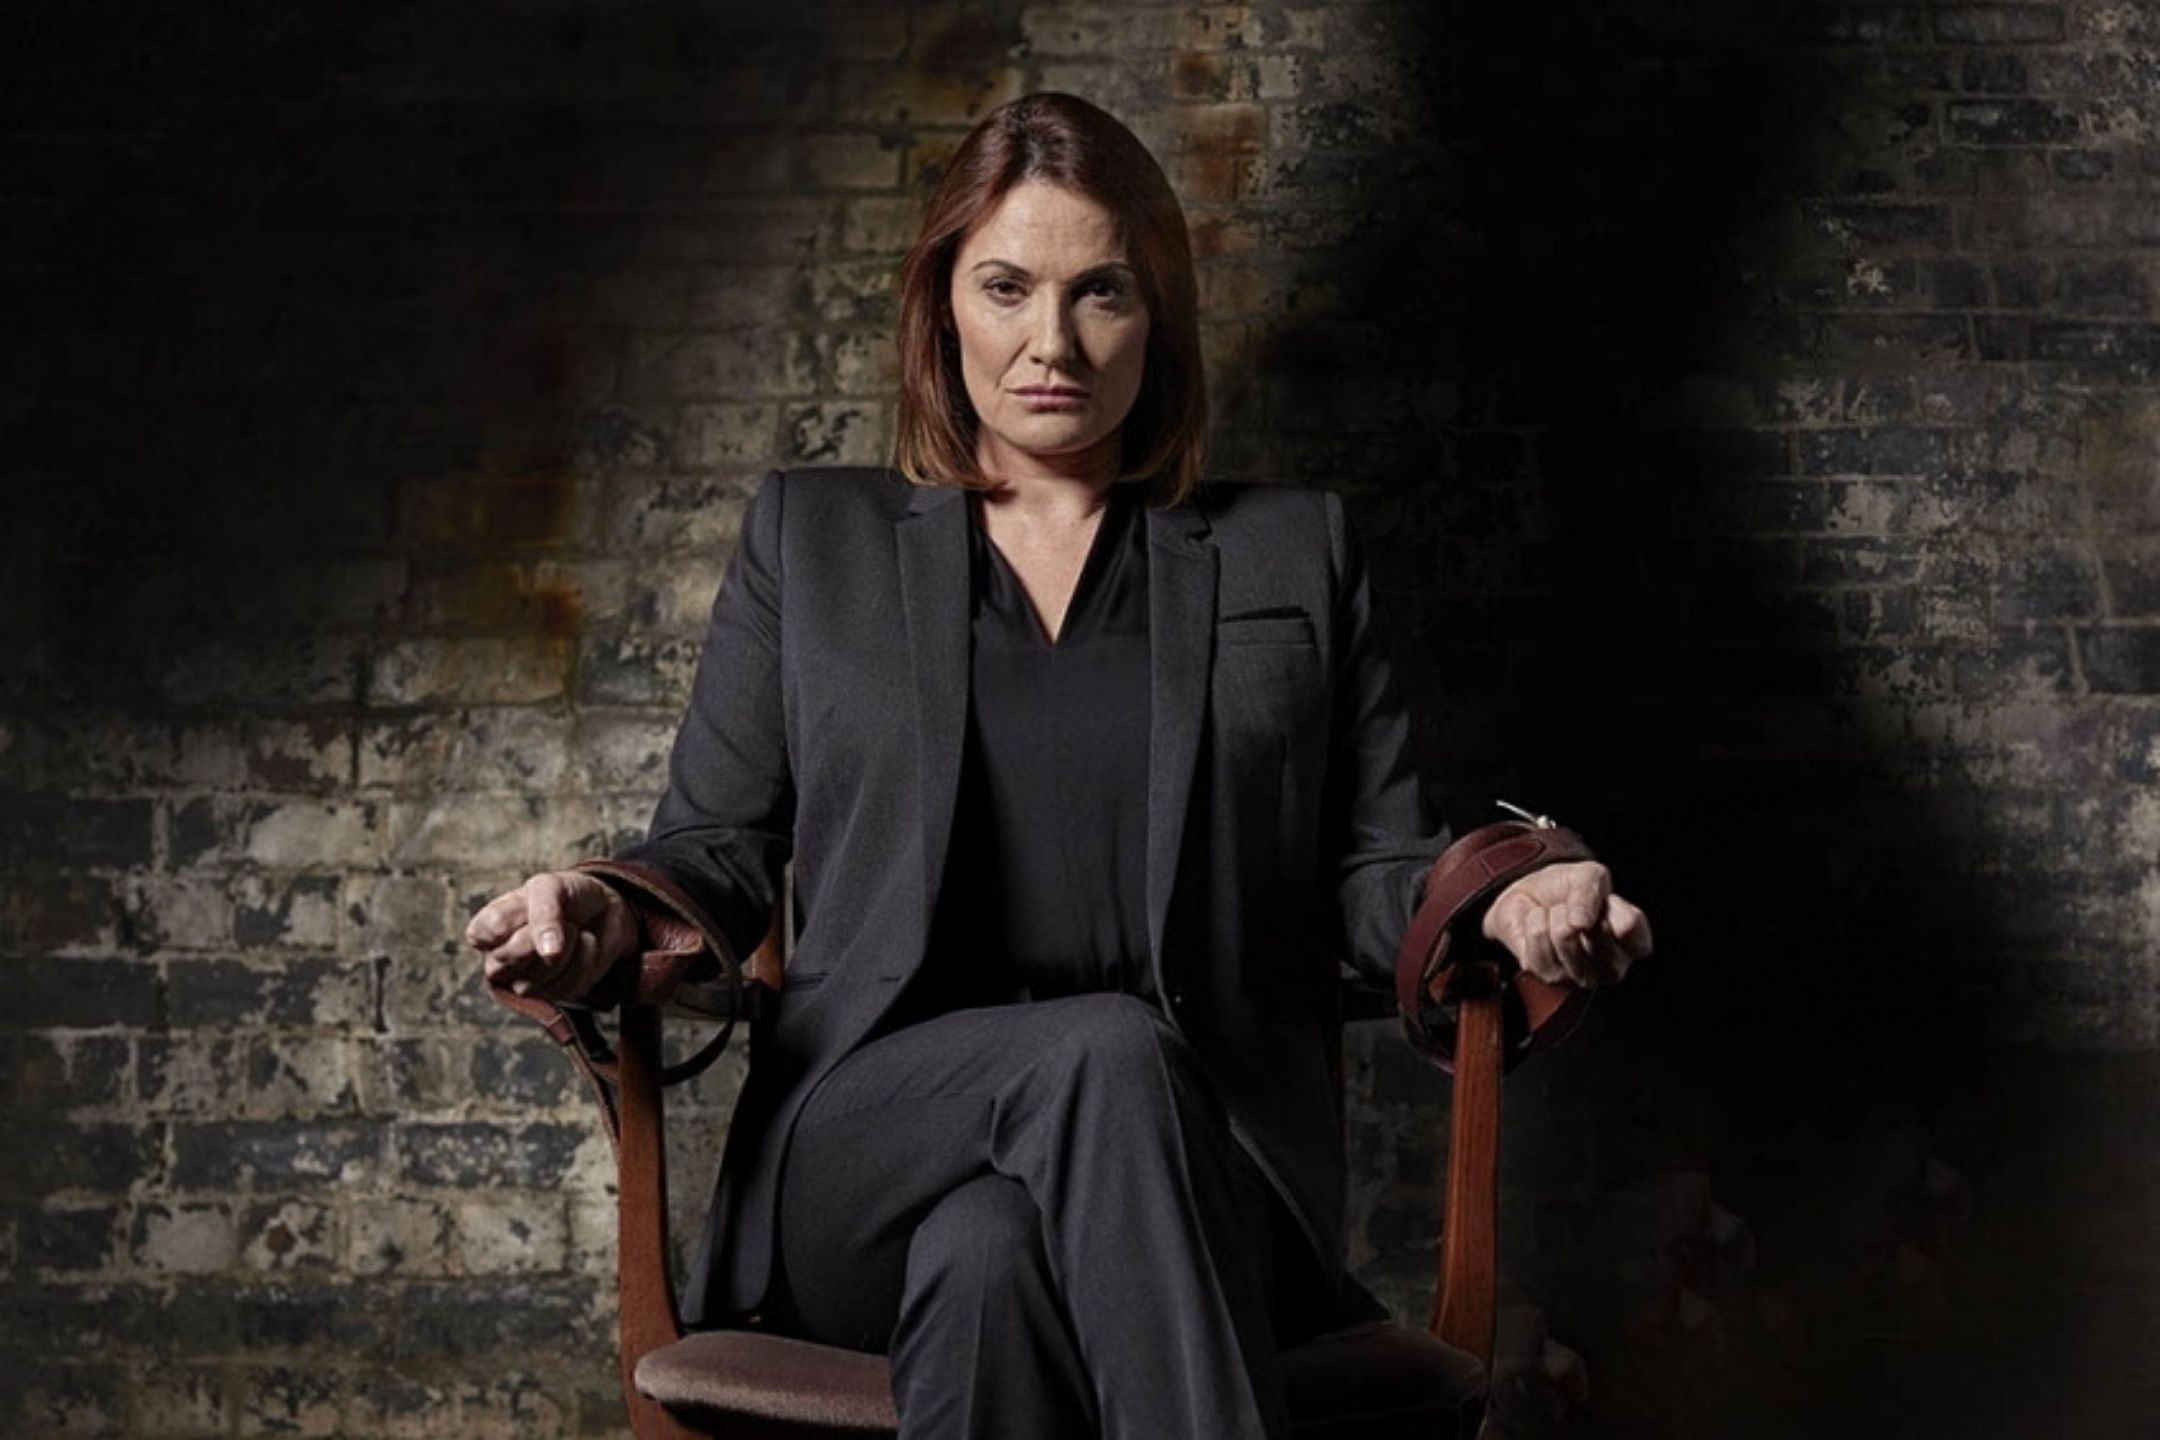 Woman in a suit tied to a chair, against a dark brick background